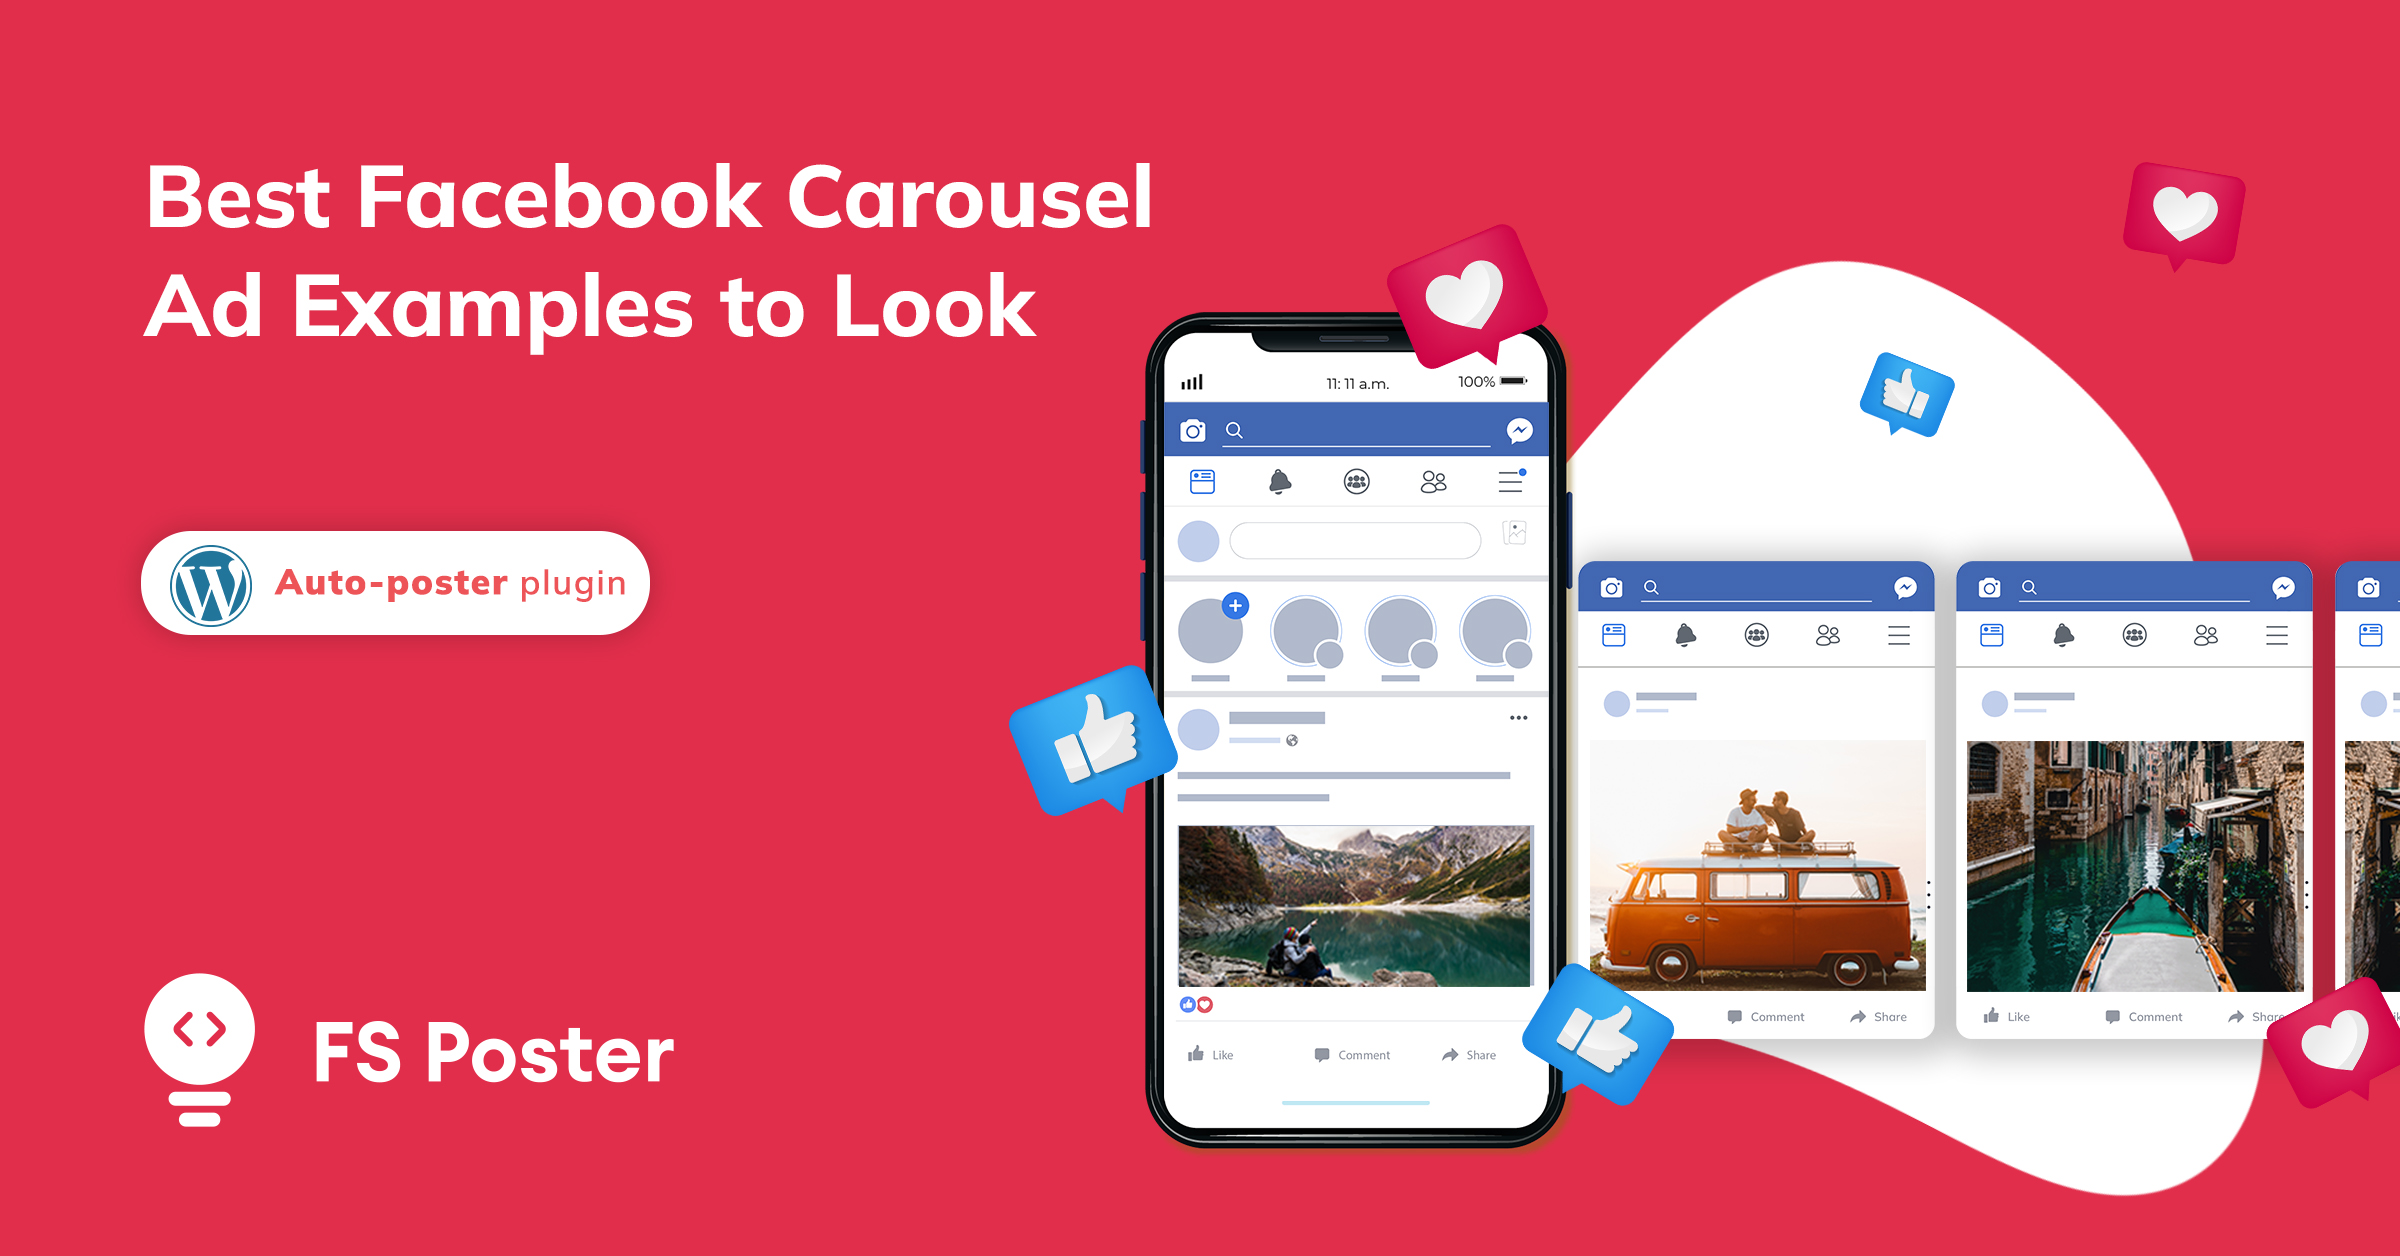 Carousel Ads: How and Why They Work (+ Examples)